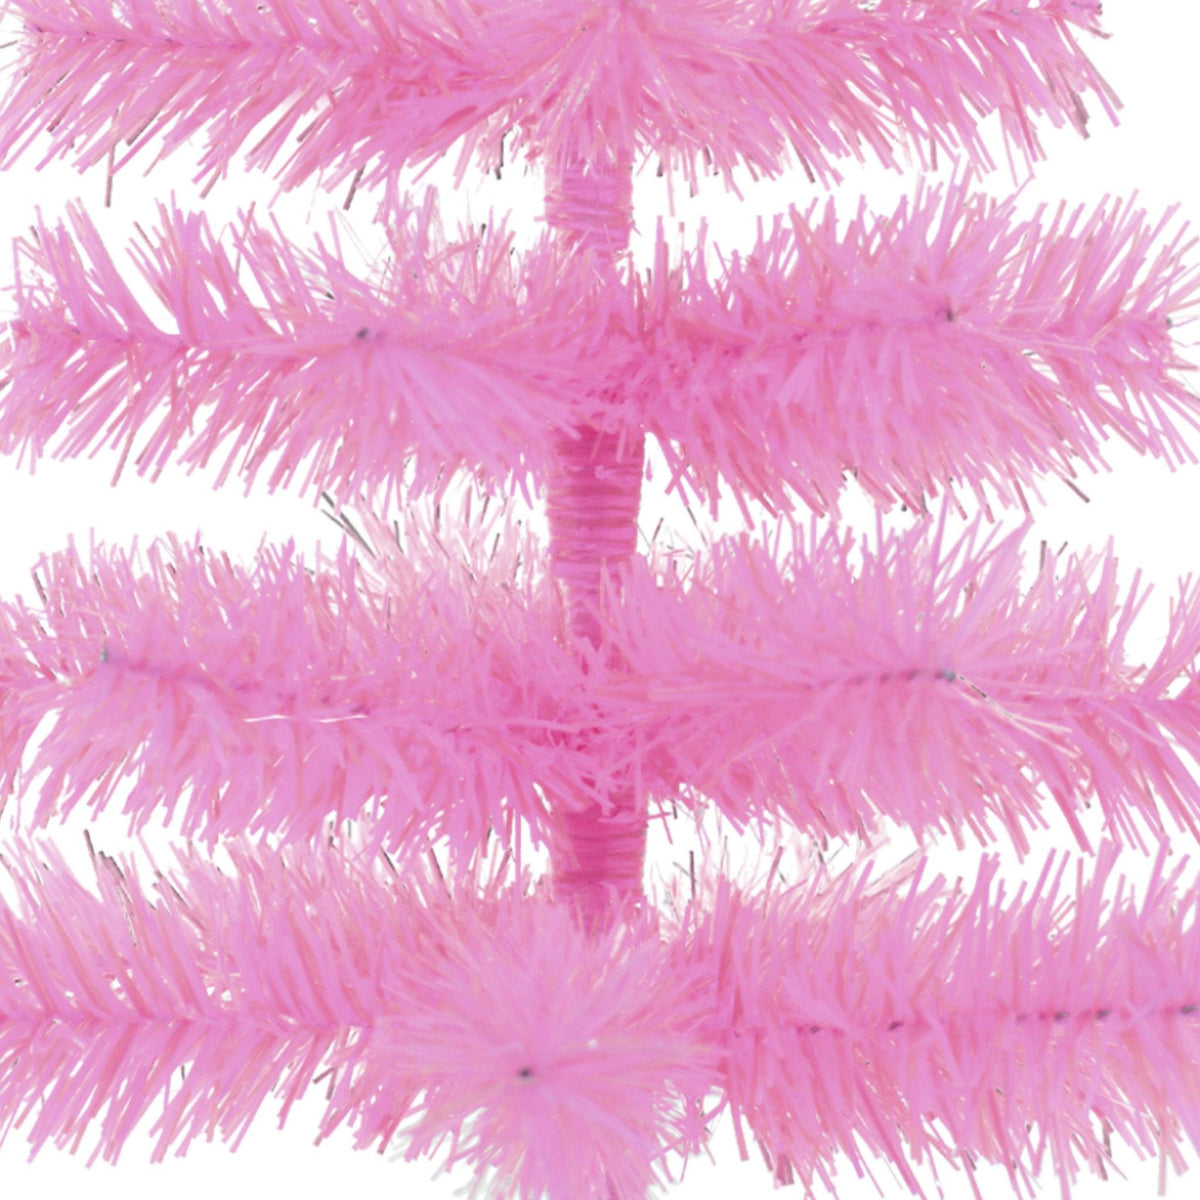 Middle section of the 2ft tall pink christmas tree. Each tree has a bunch of tips to hang your favorite holiday ornaments from.